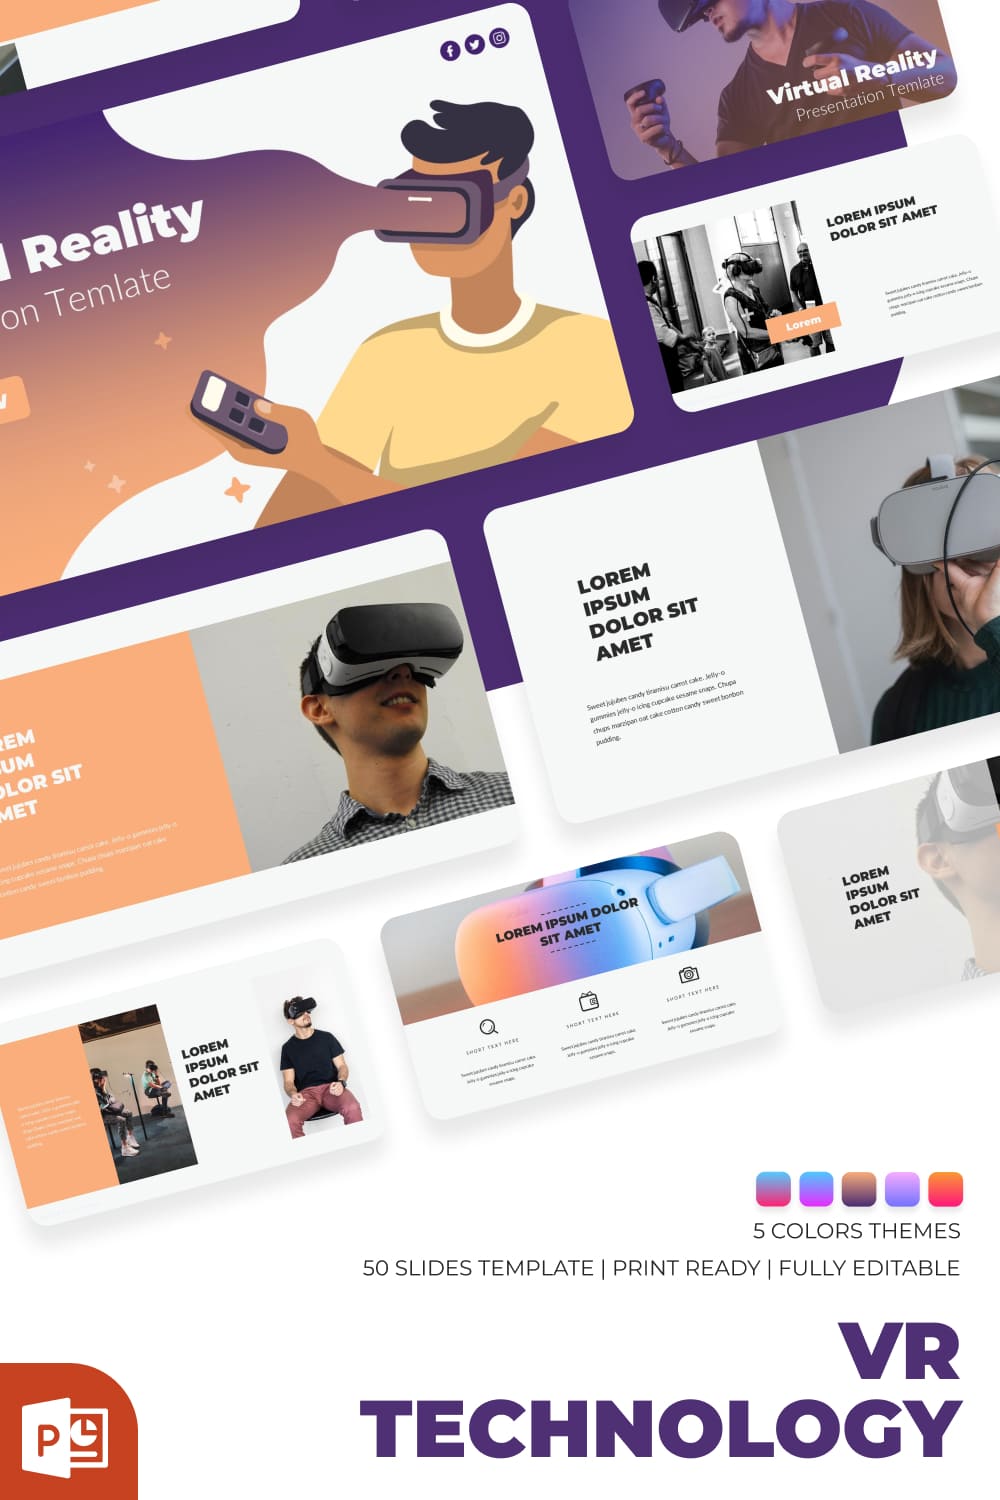 VR Technology PowerPoint Template.